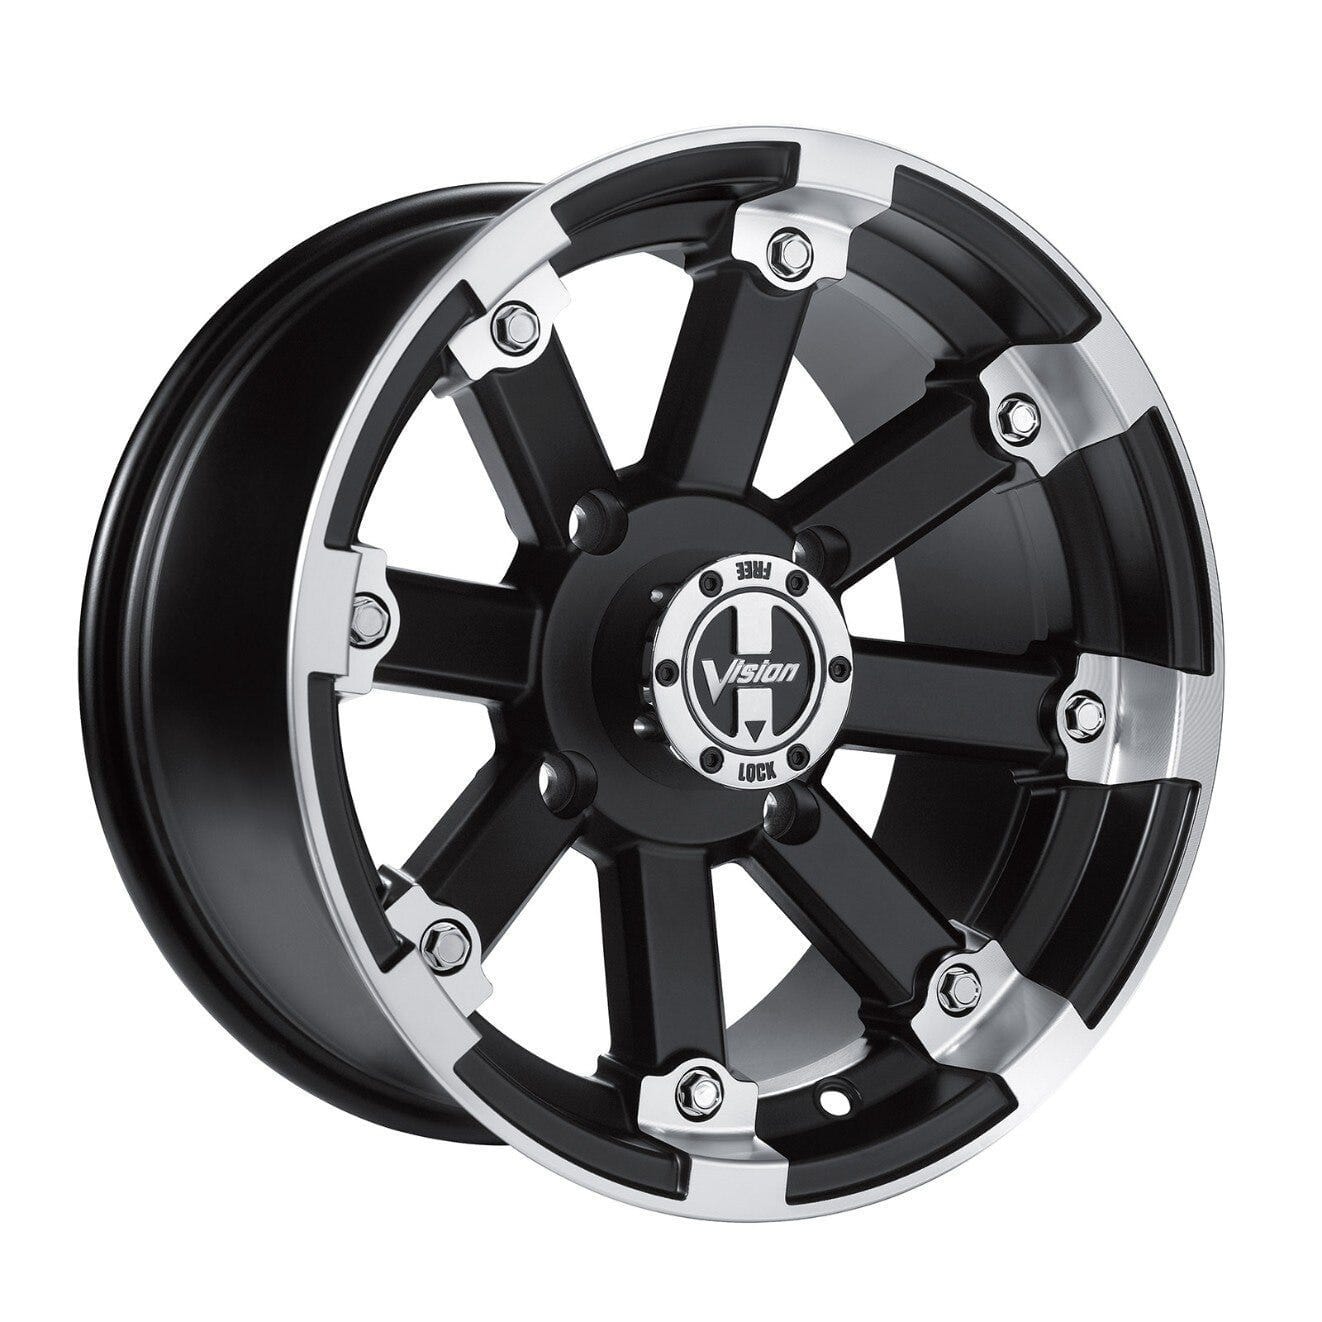 Lockout 393 14 in. Rim by Vision - Rear - Propowersports.ca